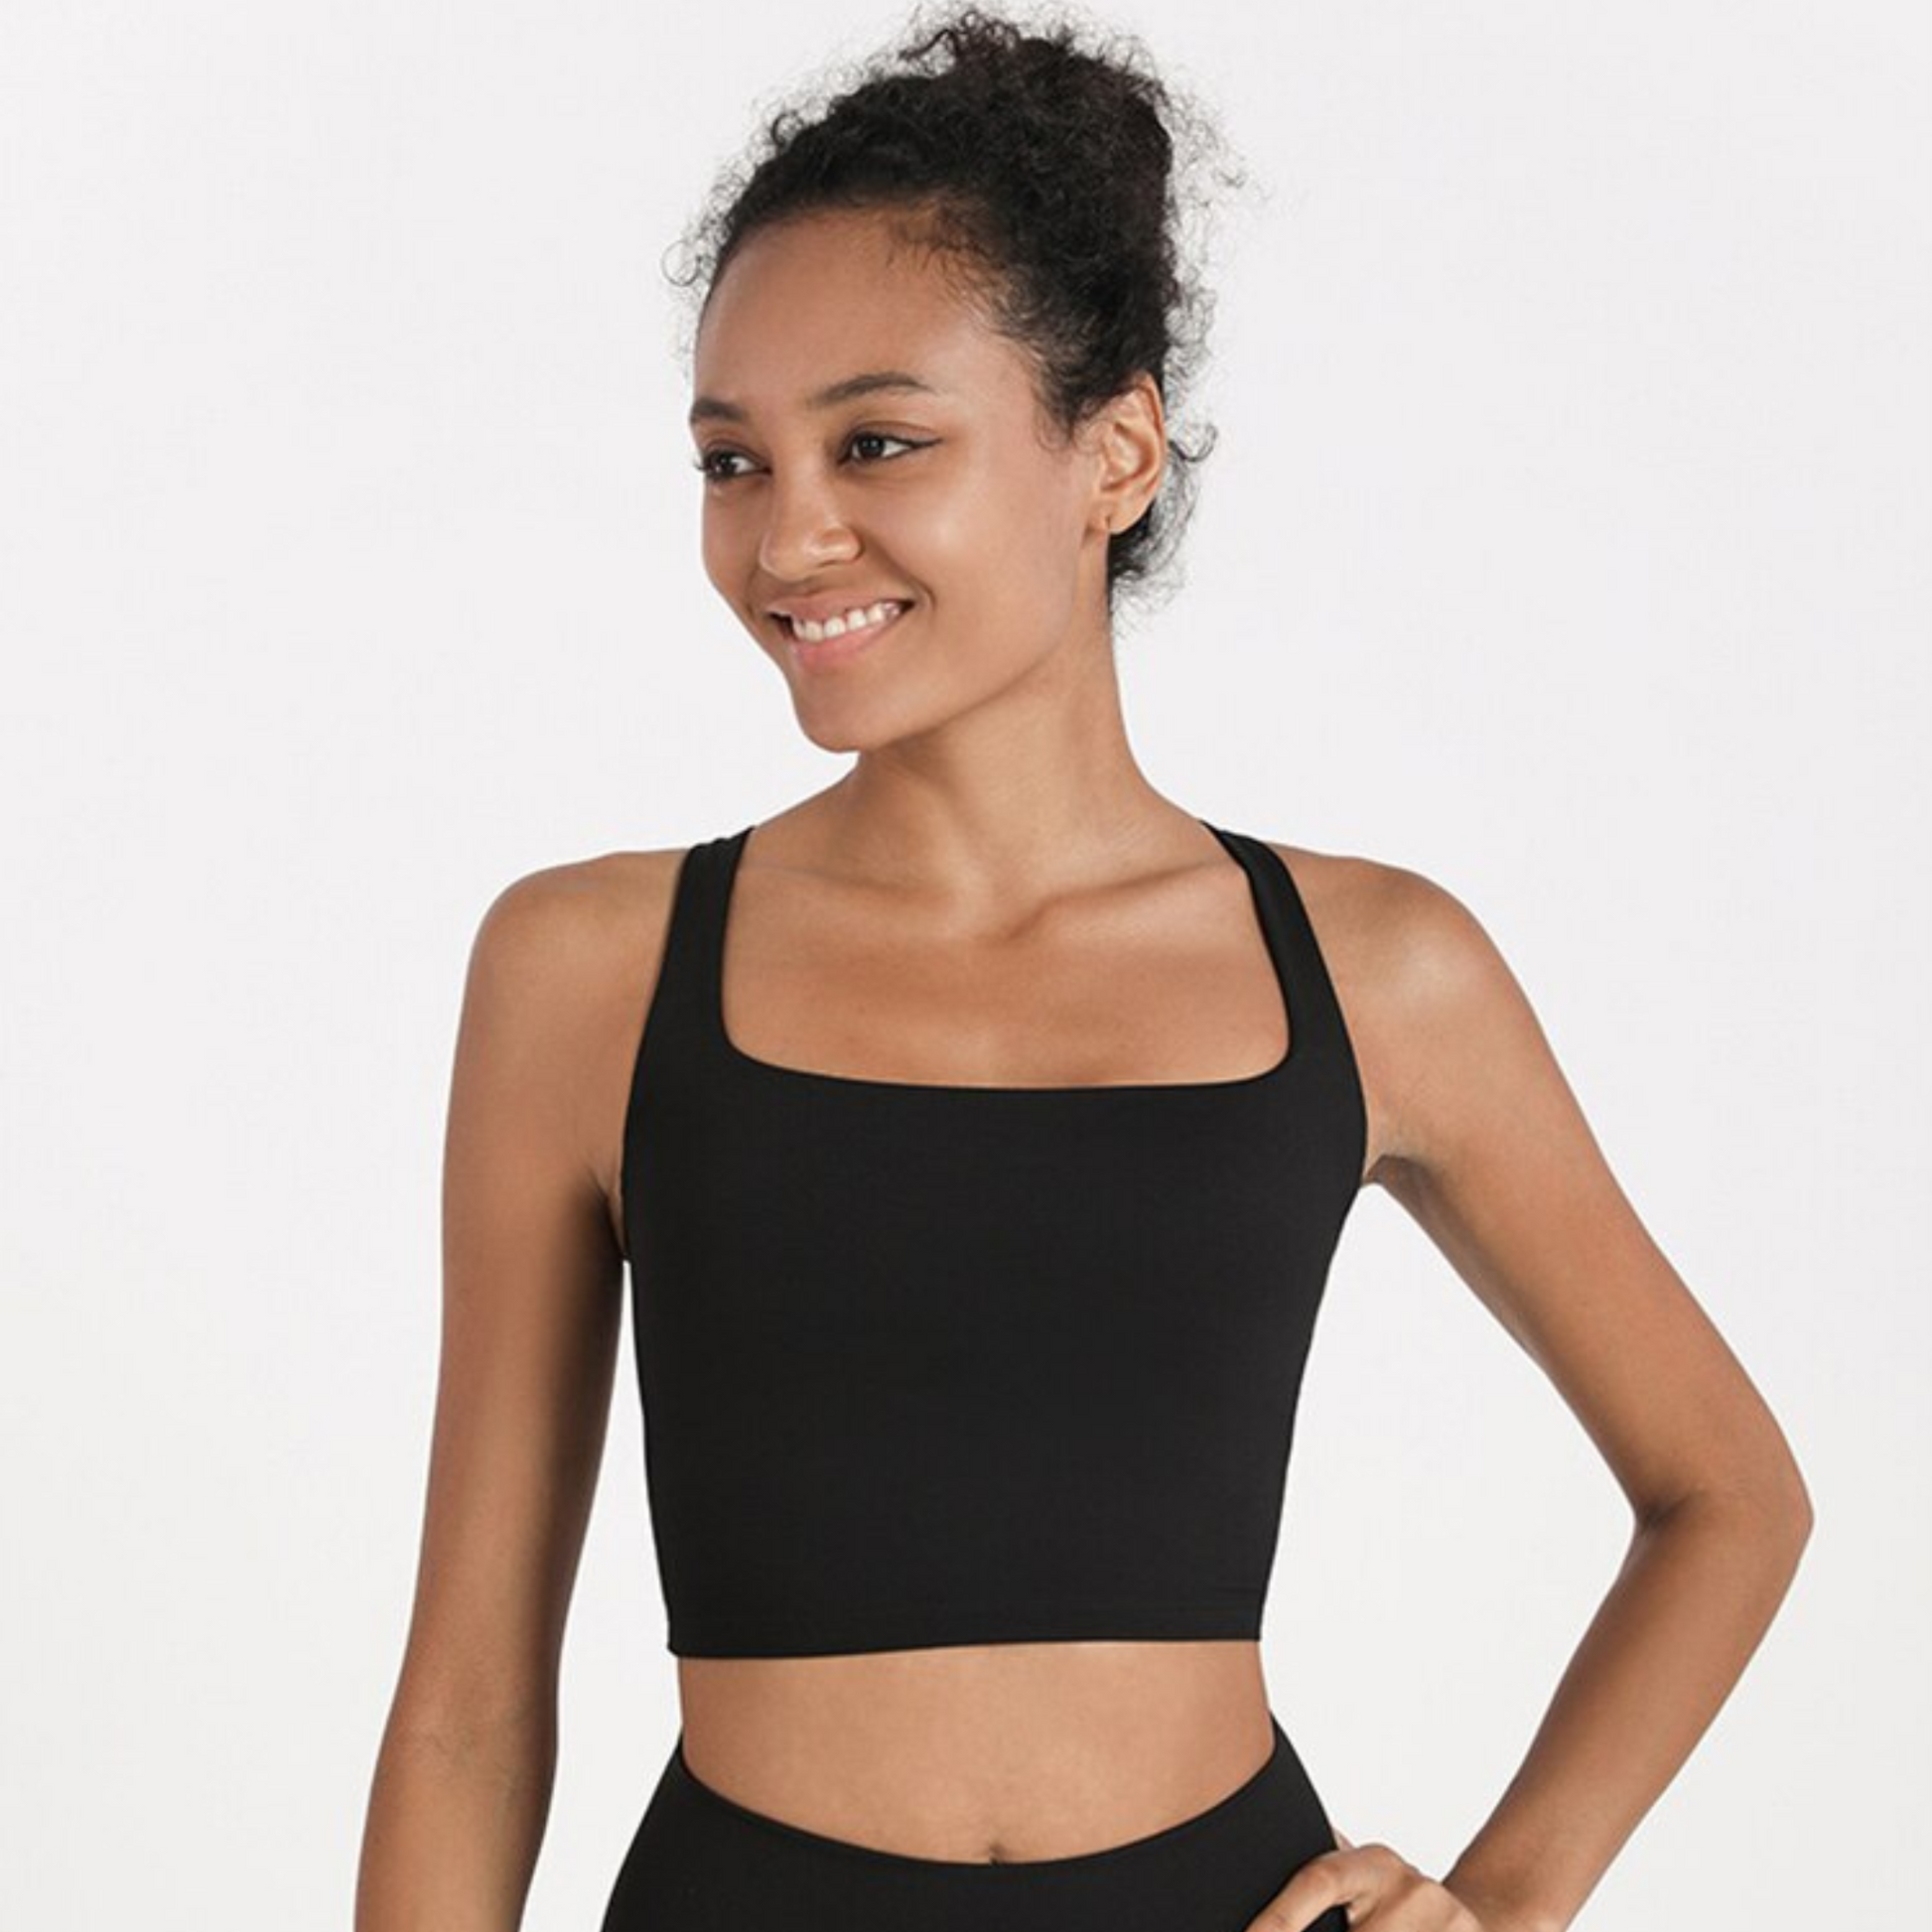 MODEL WEARING A BLACK, SQUARED NECK CROP TOP FROM VIBRAS ACTIVEWEAR